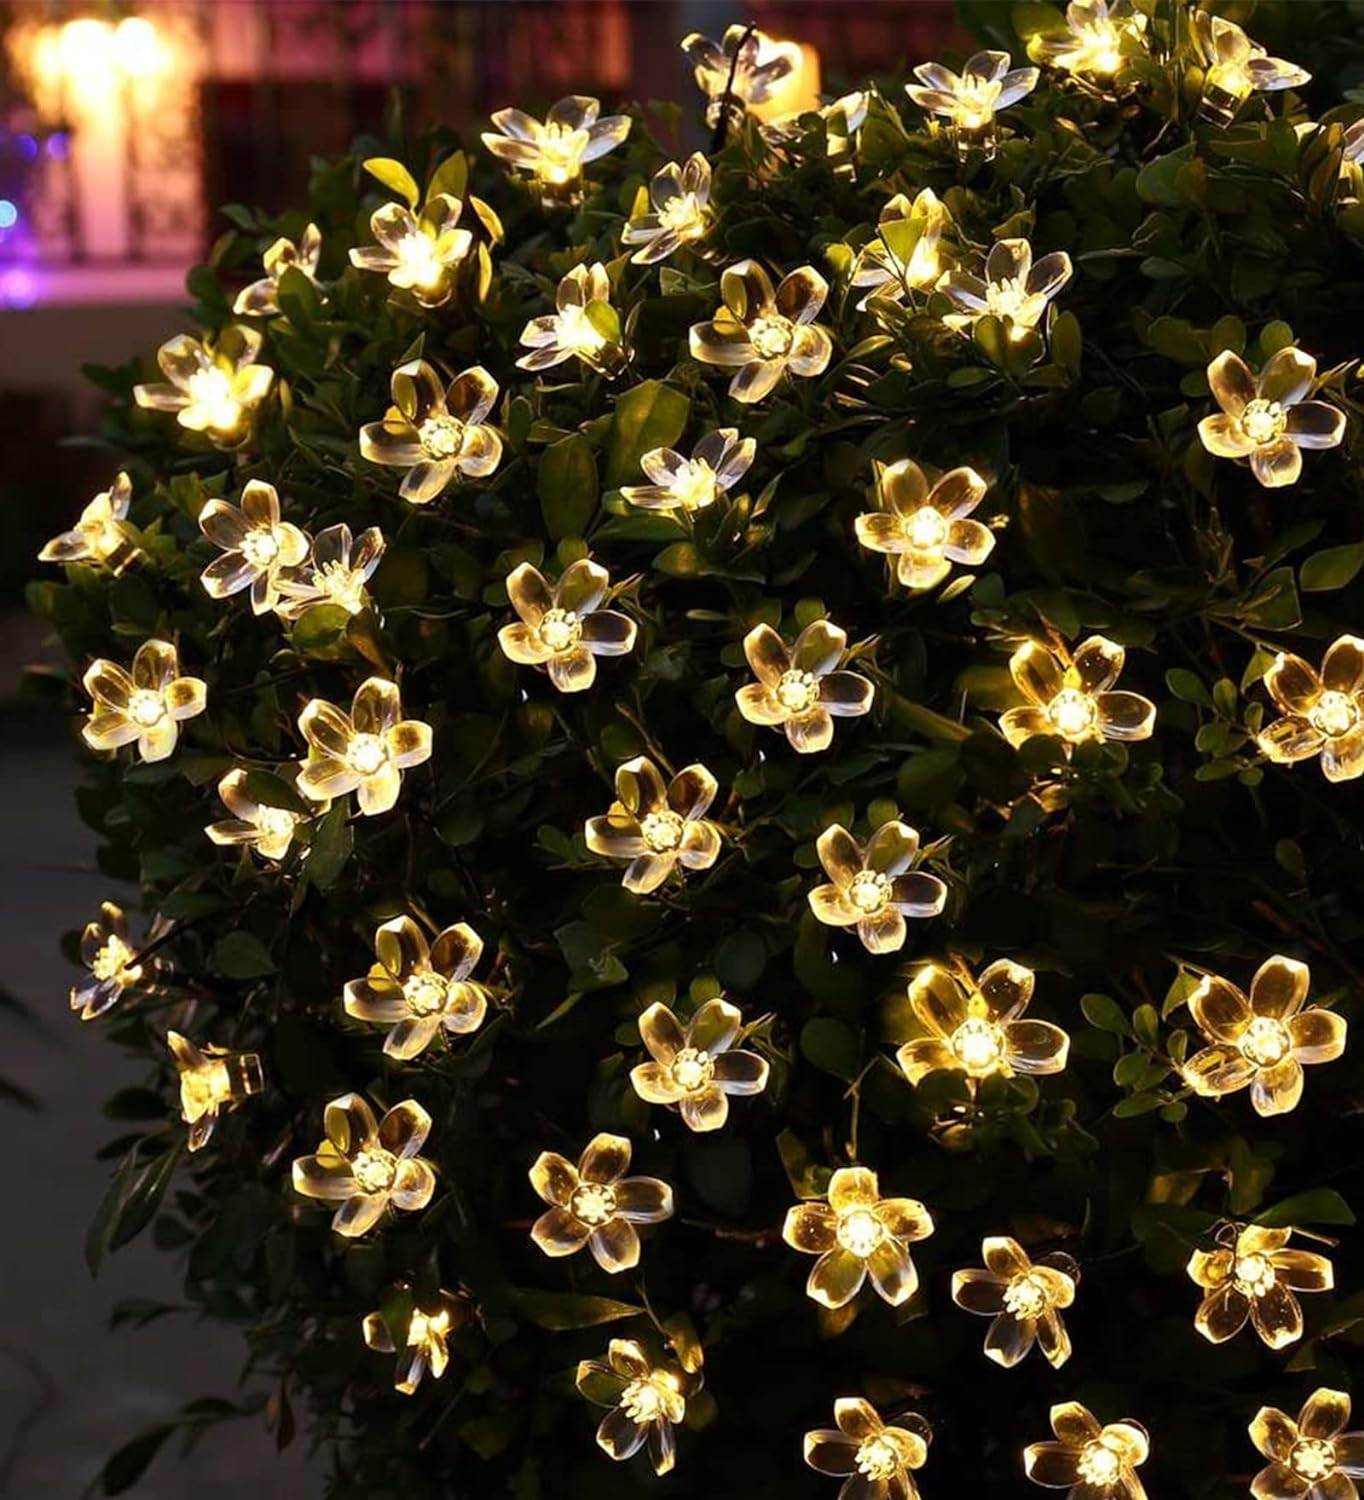  Glowing lights decorating a bush in the night.